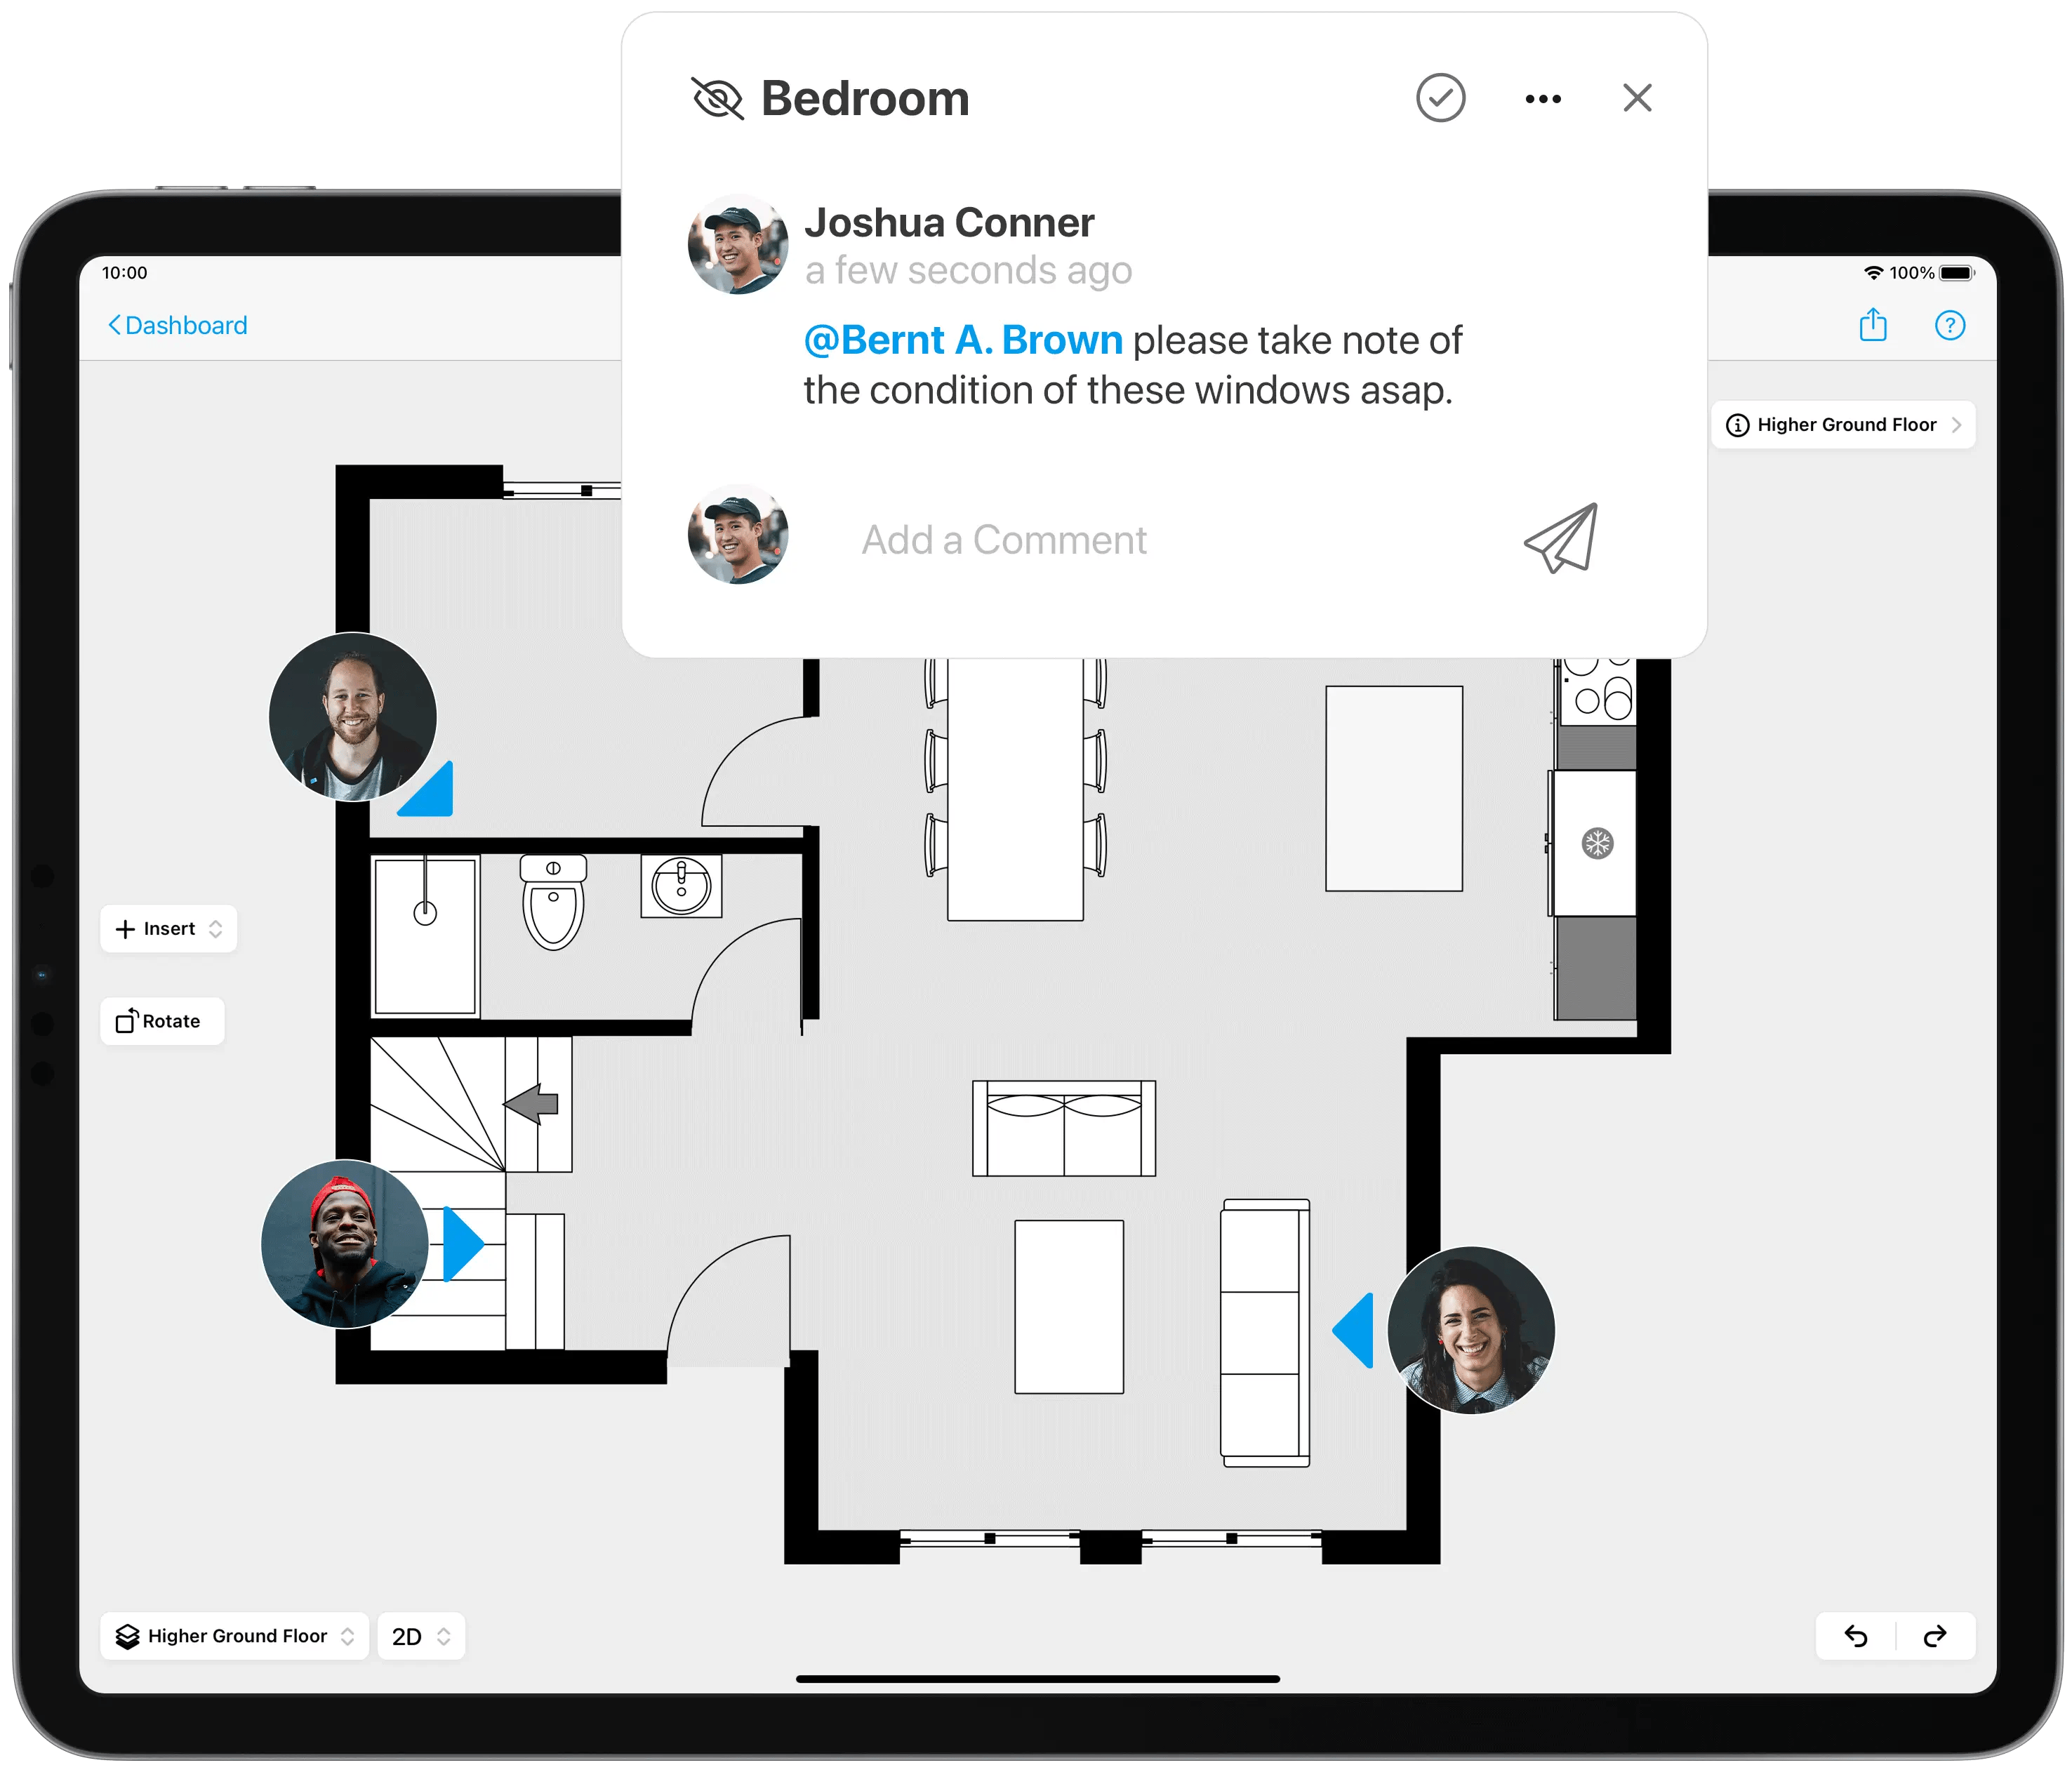 Restoration company employees communicating through the commenting features of the magicplan app on a 2D floor plan on an ipad about the condition of a window.